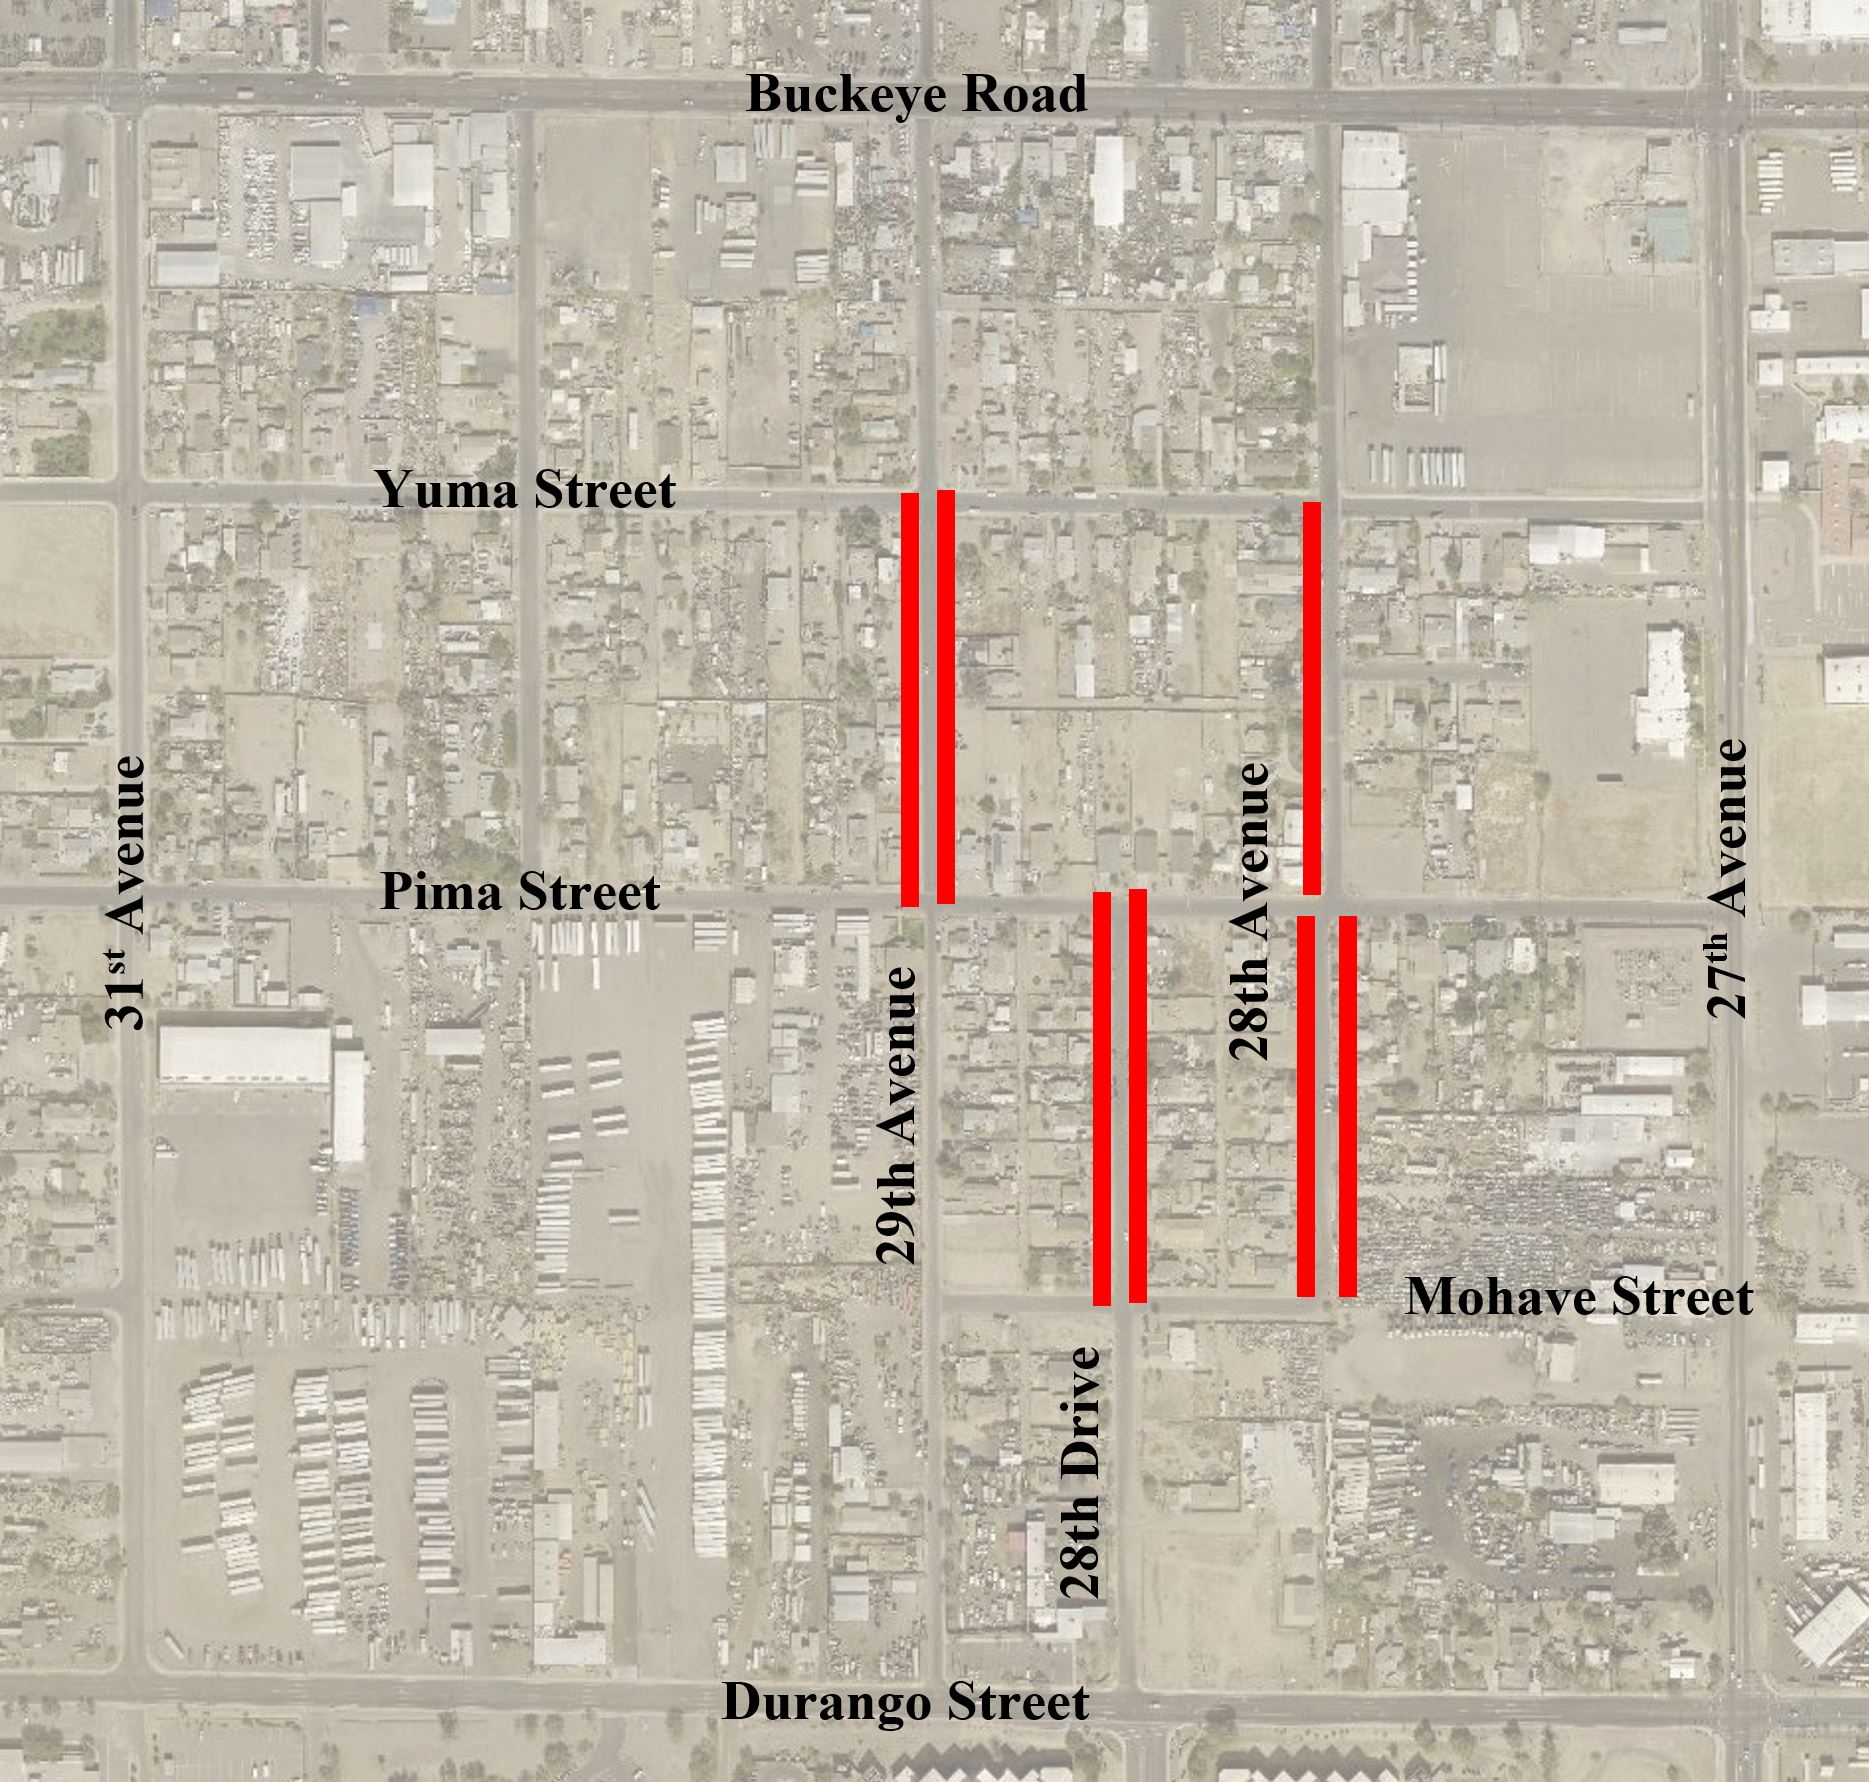 Area bounded by Durango Street to Buckeye Road and from 31st Avenue to 27th Avenue